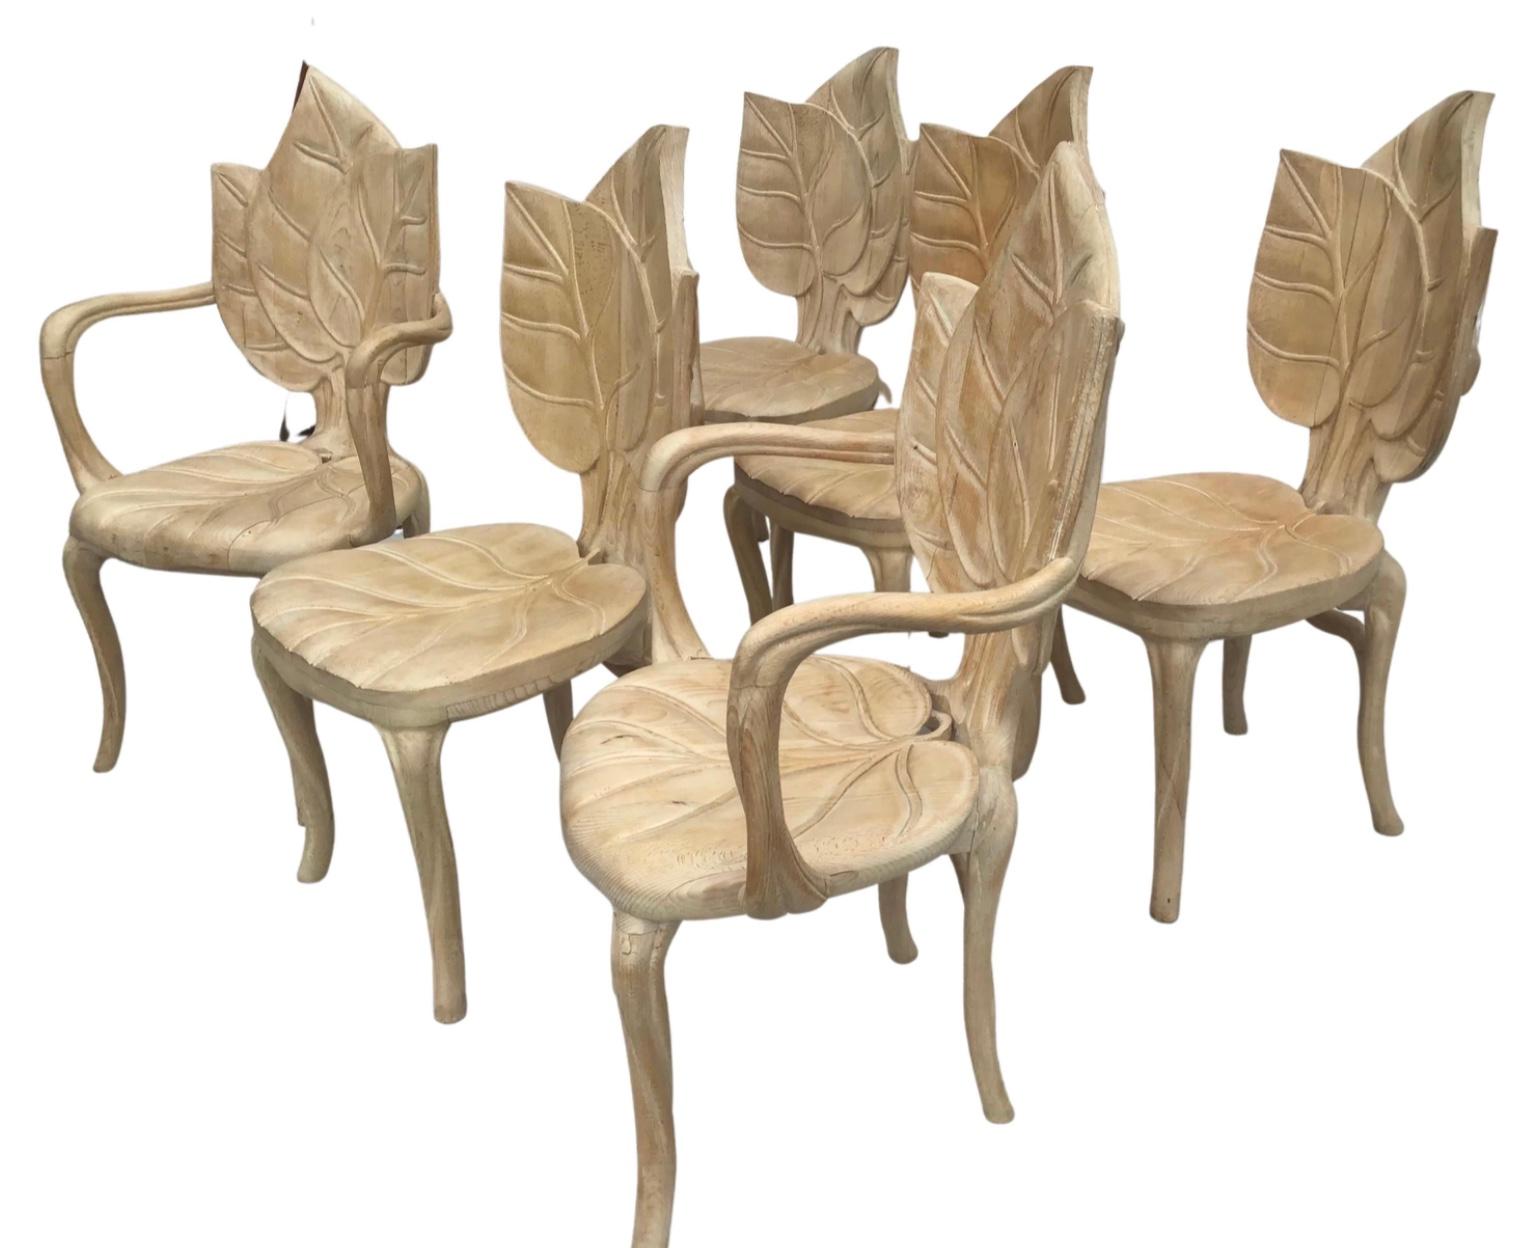 Unique set of hand carved leaf armchairs by Bartolozzi and Maioli. Surrealist fantasy furniture. The back of the chair and the seat are carved with leaves motifs.
Organic shaped arms and feet. 